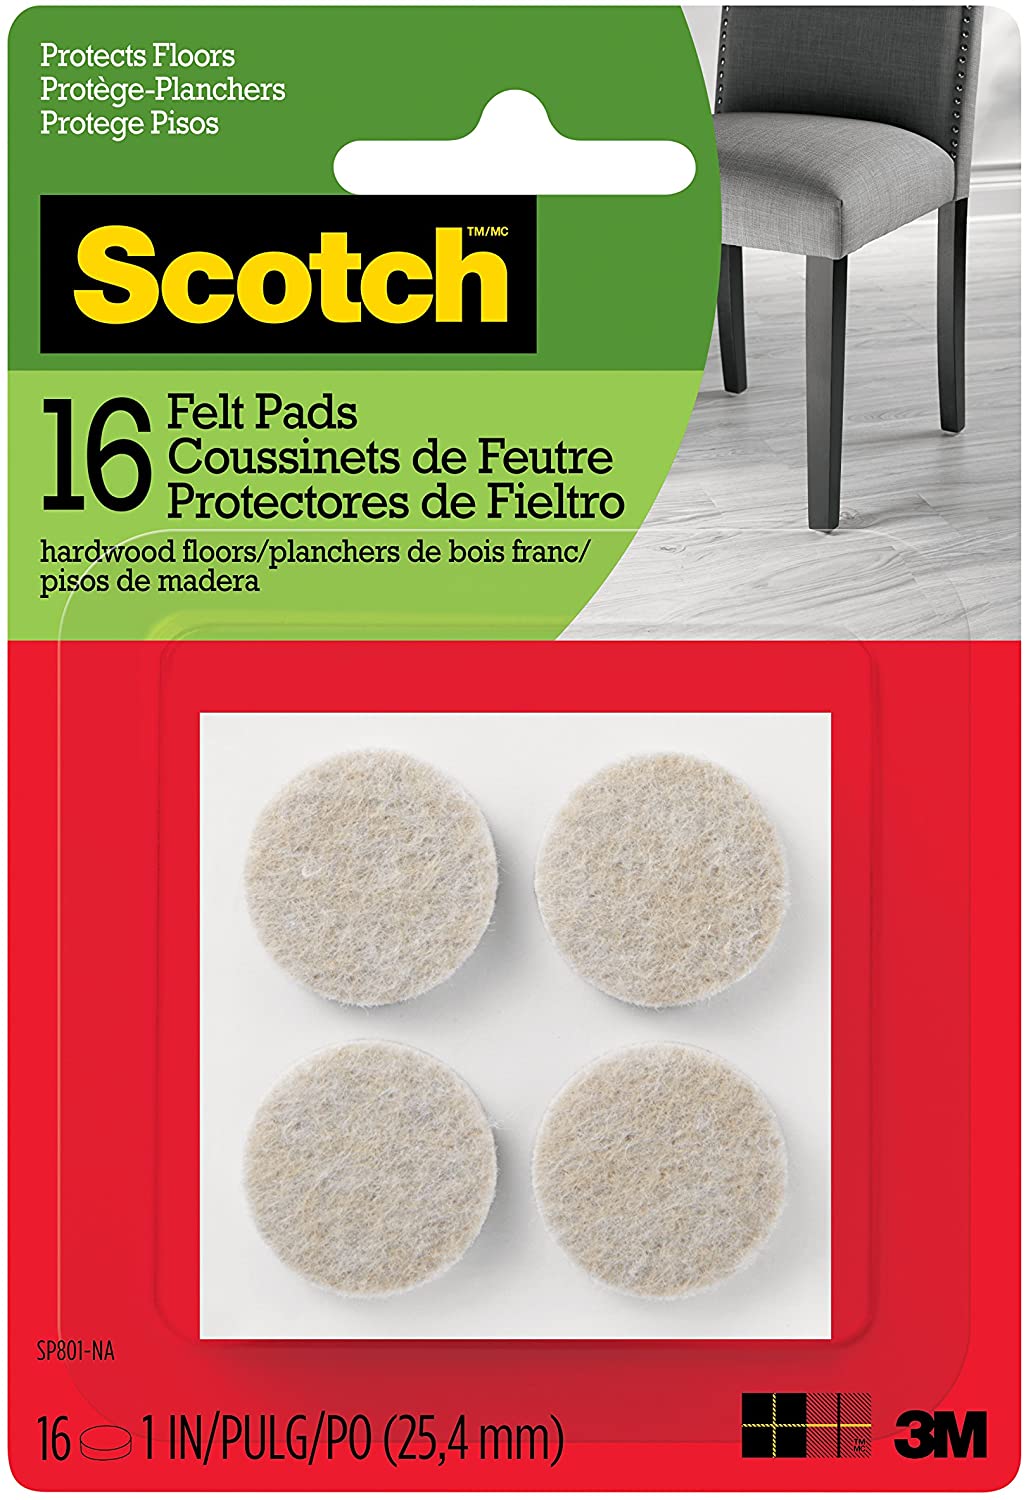 Scotch Felt Pads Round, 1 inch Diameter, 16 pcs Beige Fastening and Surface Protection Protects floors